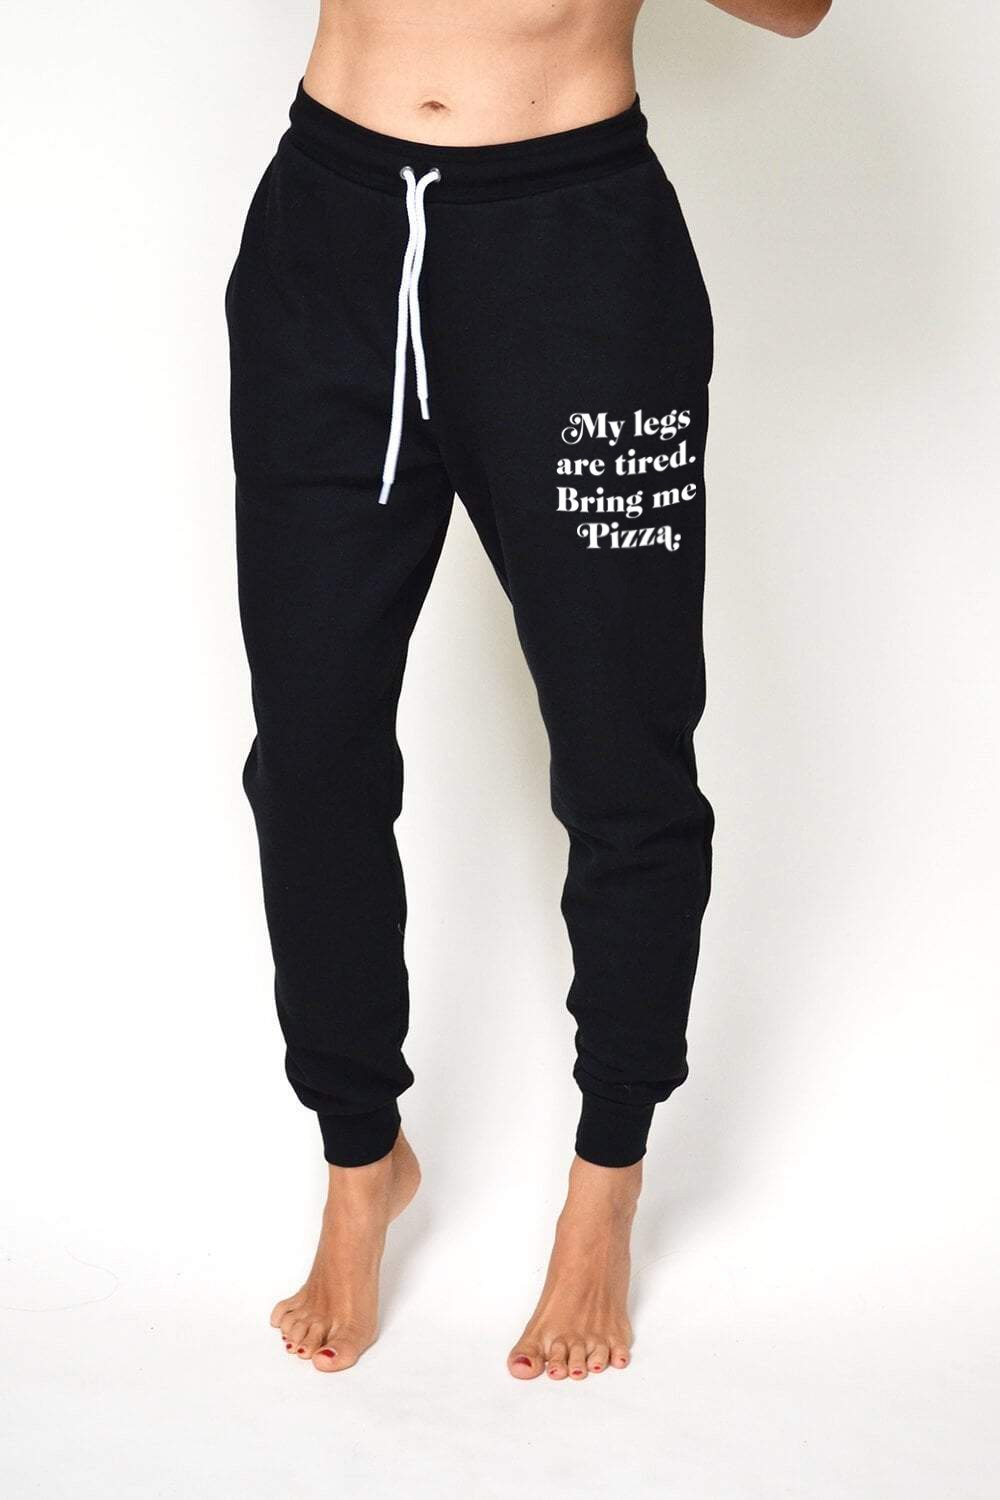 Sarah Marie Design Studio Pants XSmall / Coffee My legs are tired. Bring me Wine. Joggers